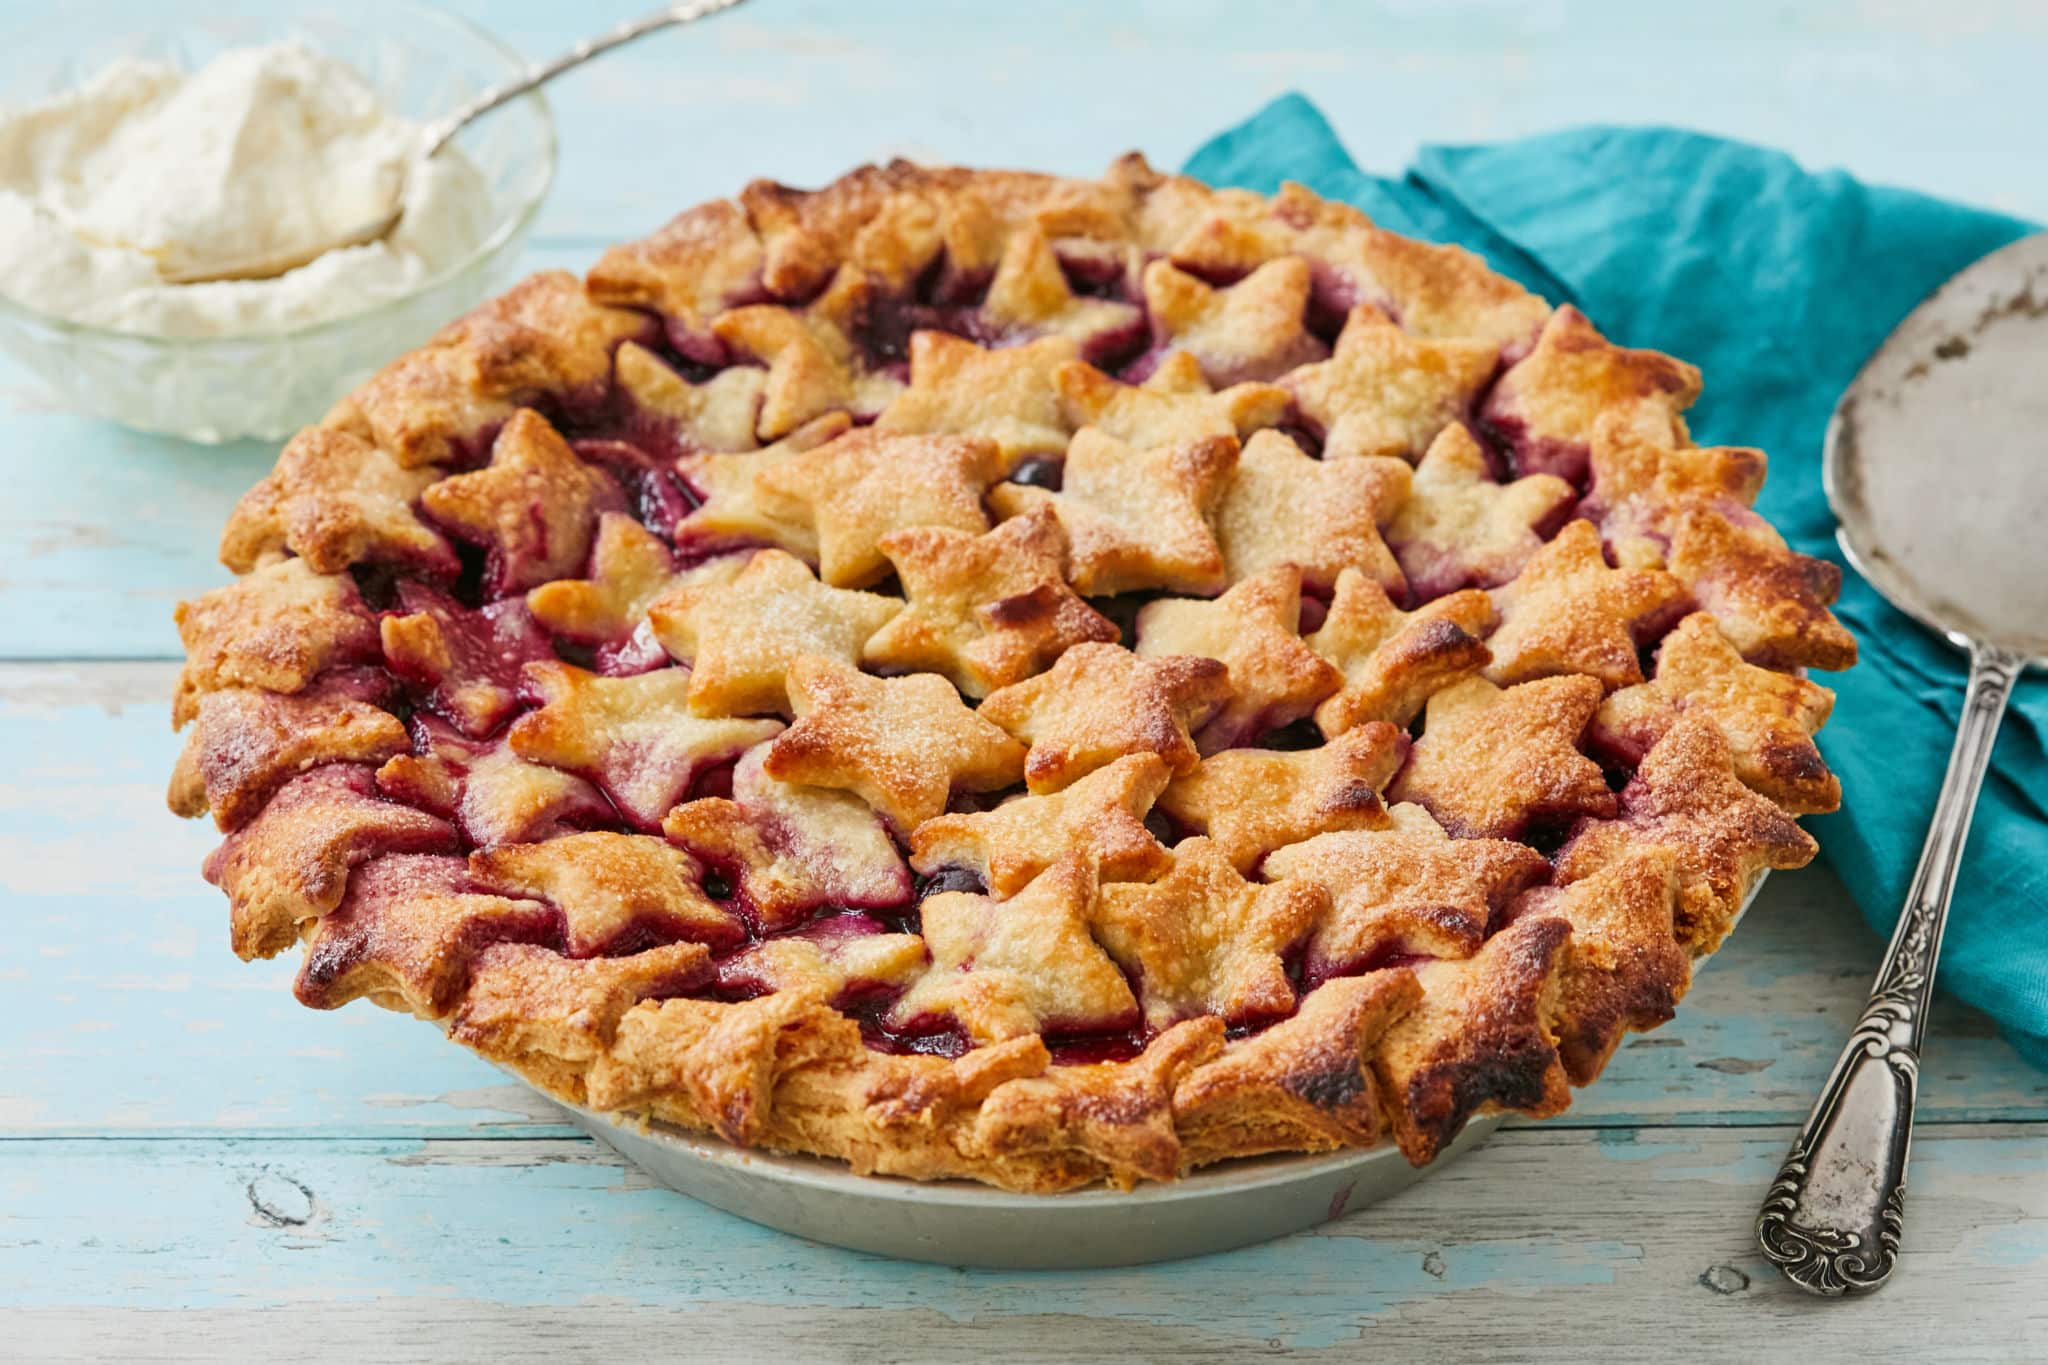 A Blueberry Cranberry Pie decorated with stars